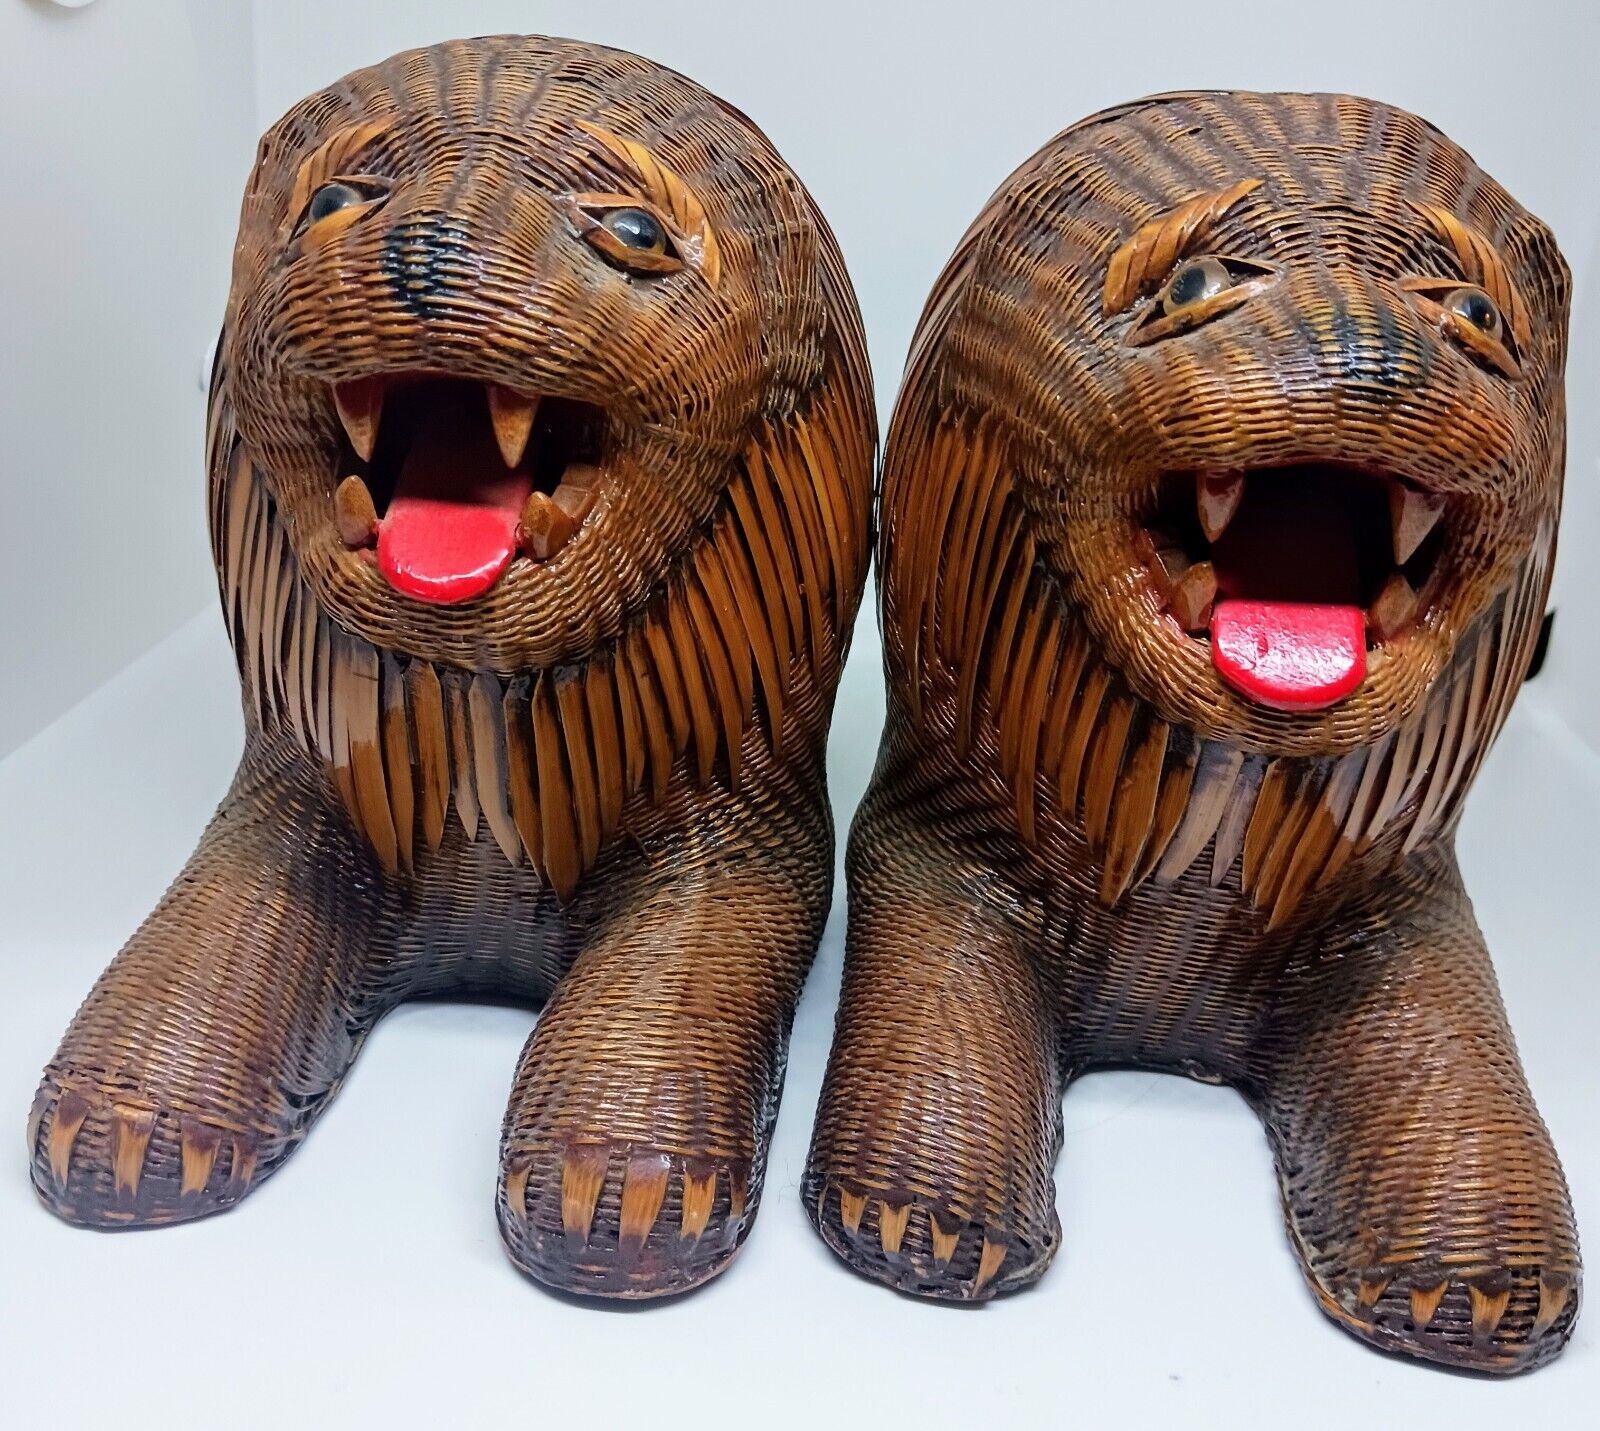 Vtg  Lion Bookends Woven Reed - Wicker/Polychrome Shanghai Handicrafts China